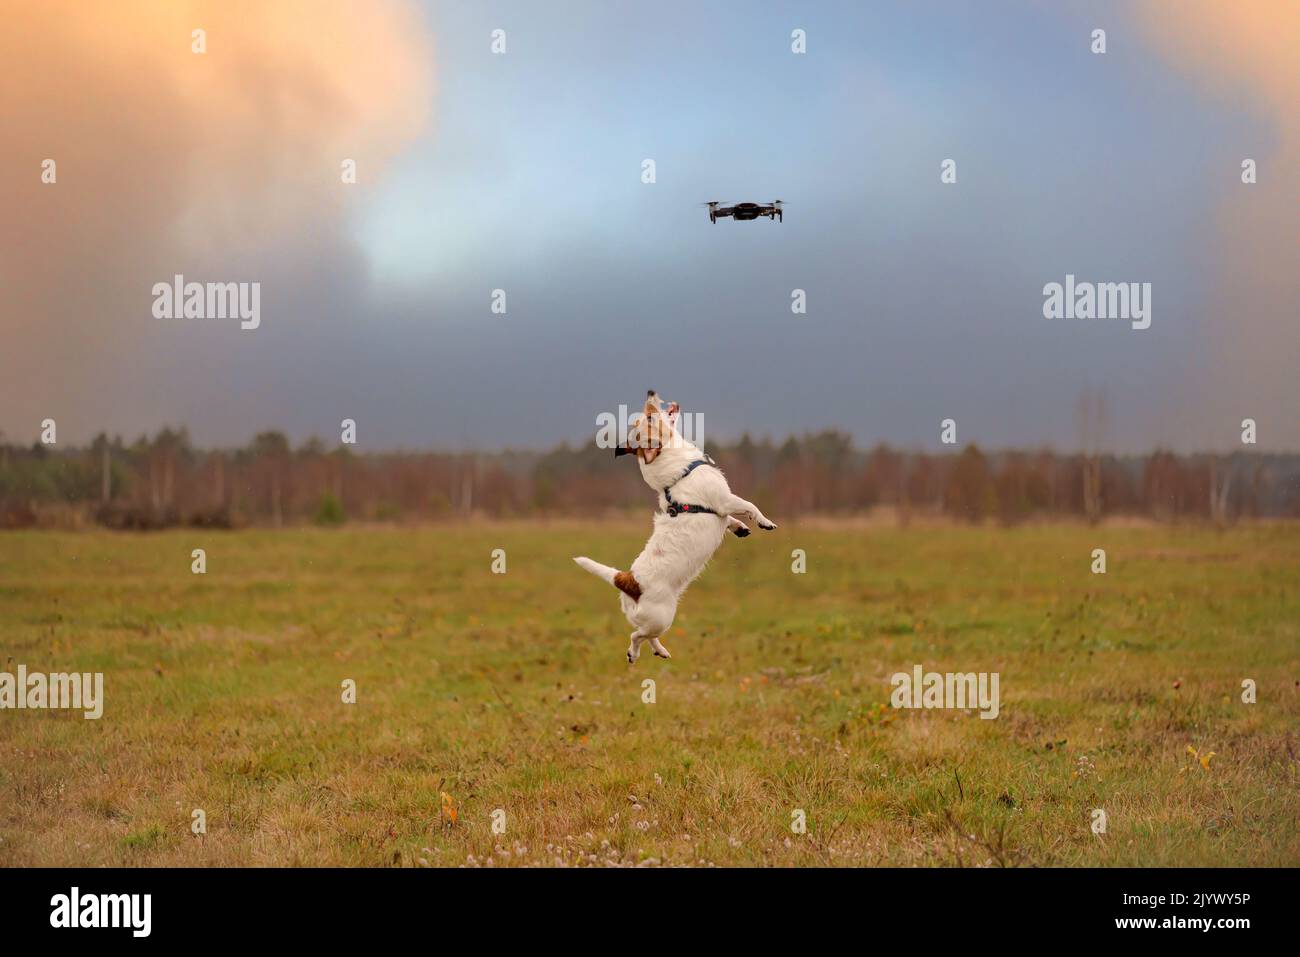 Funny dog chasing drone in field jumping high to catch it Stock Photo